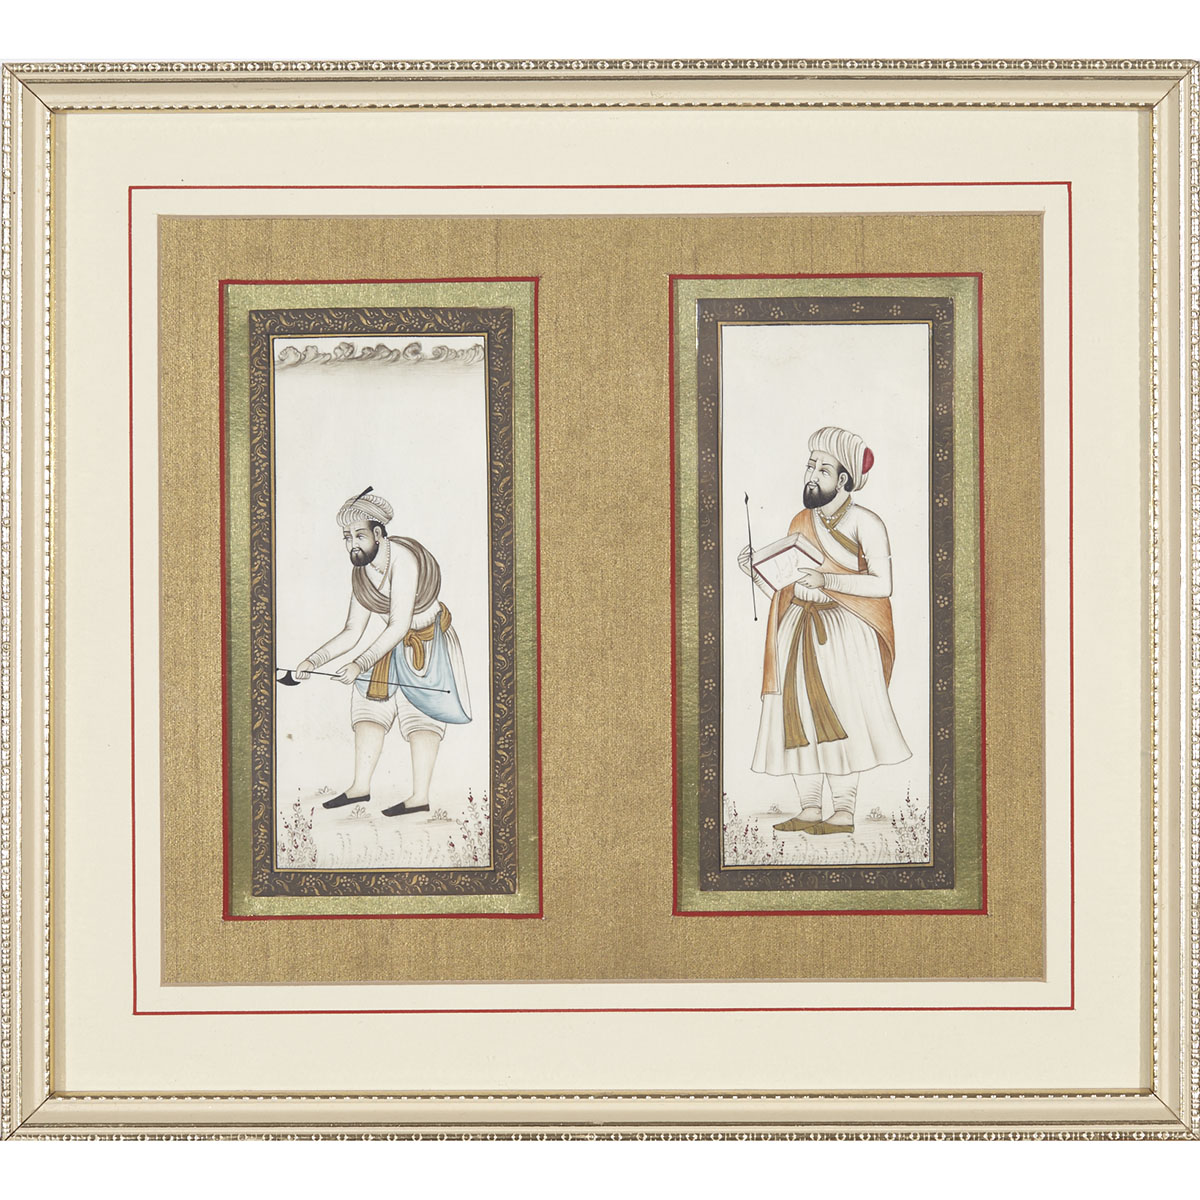 A Framed Persian Miniature of Two Scene Together with a Miniature Page, Early 20th Century